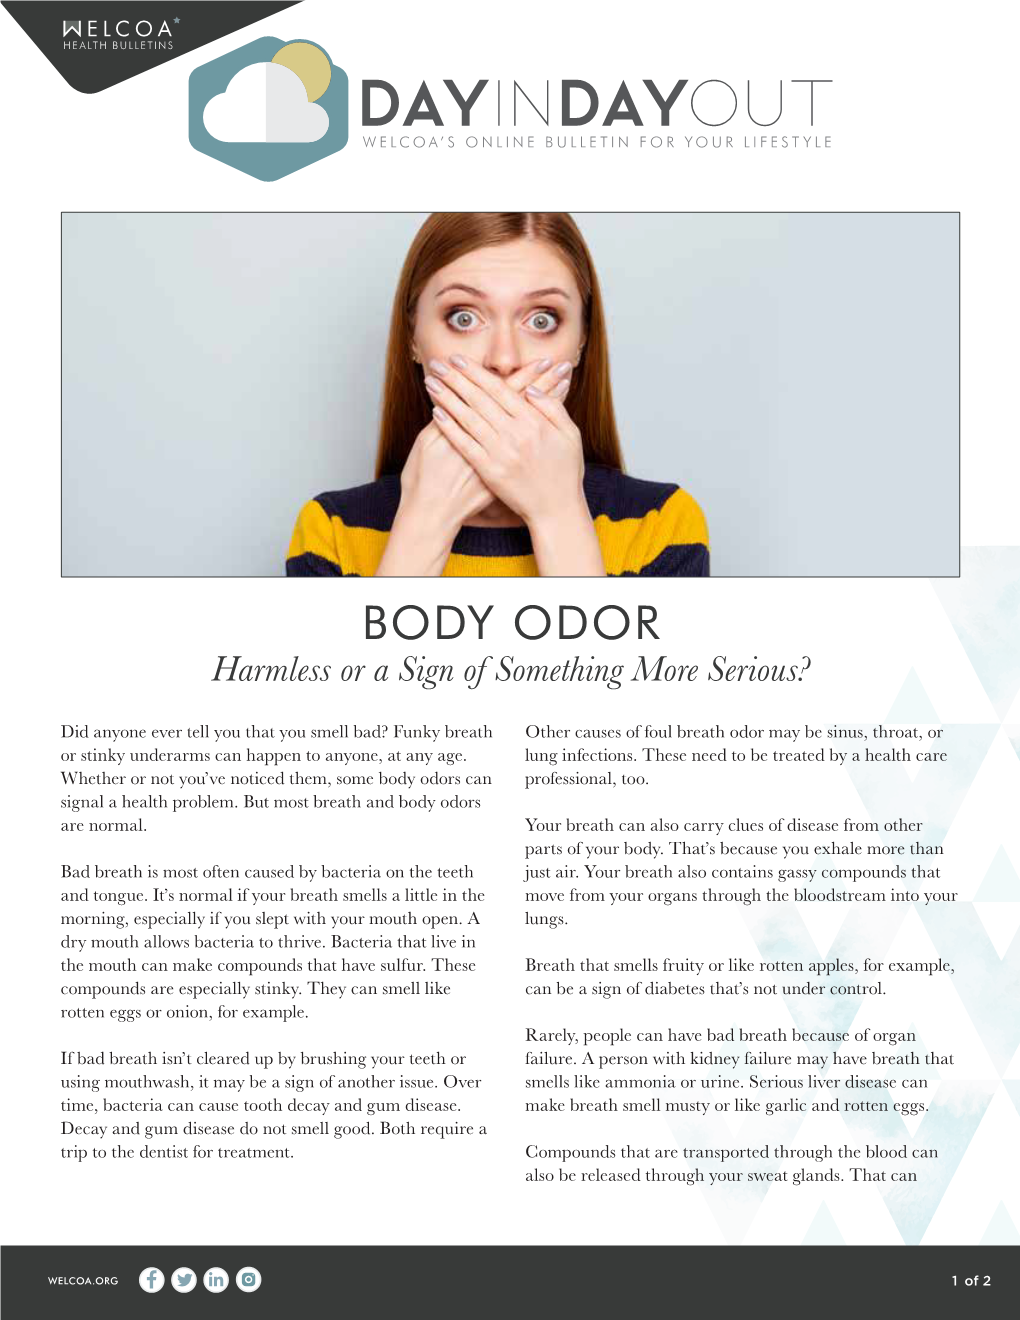 BODY ODOR Harmless Or a Sign of Something More Serious?